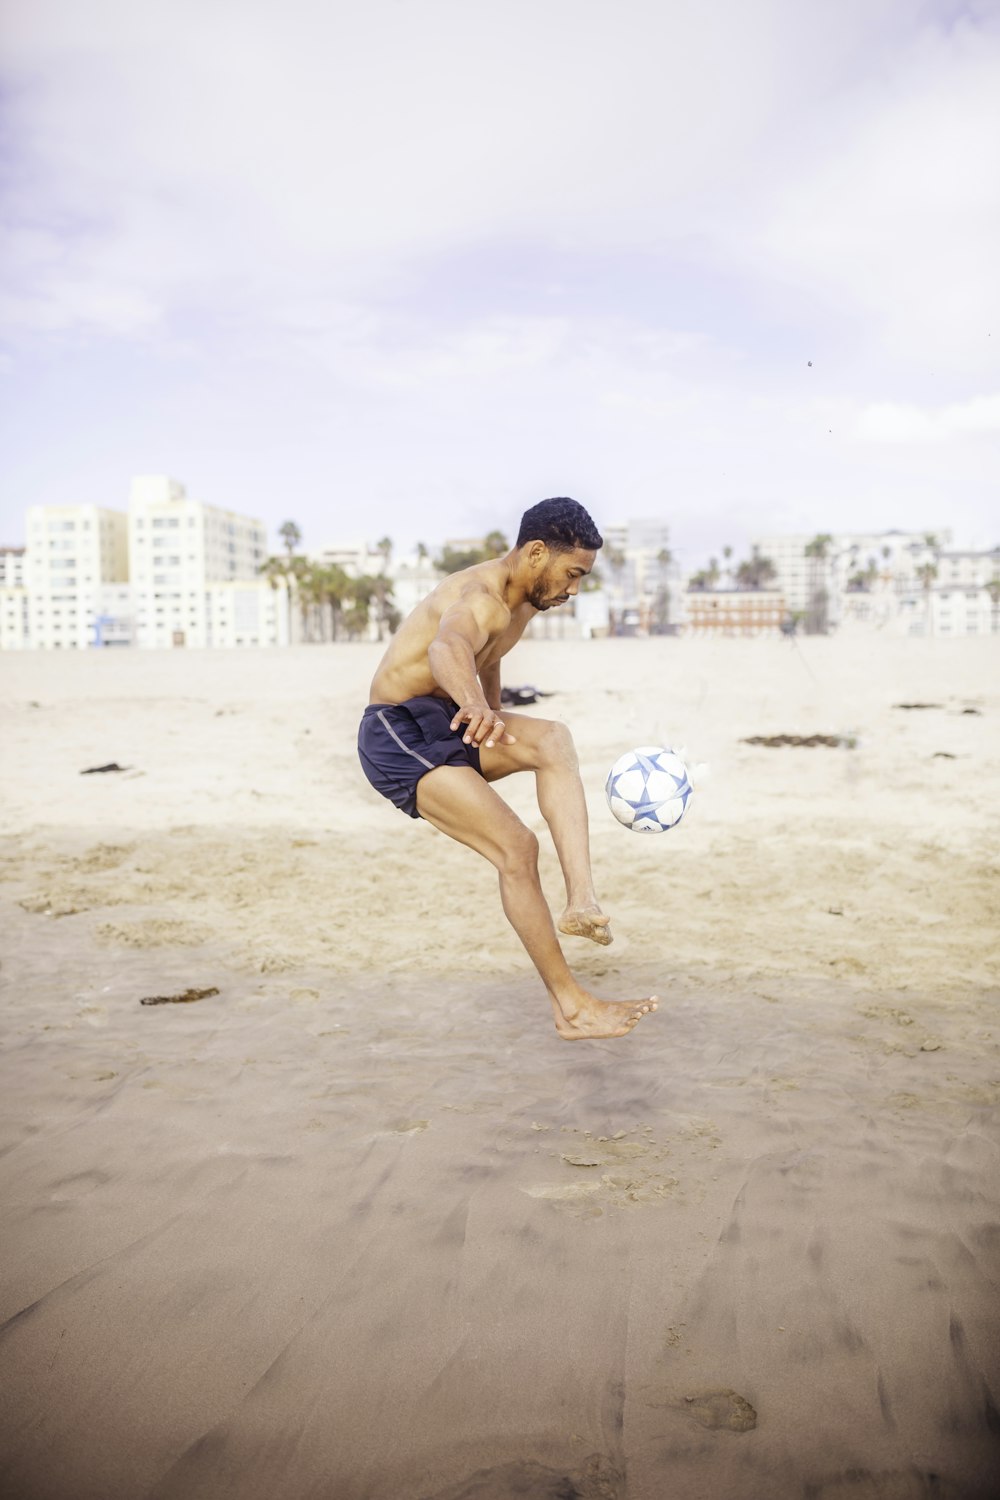 man in blue shorts playing with white and red soccer ball on beach during daytime